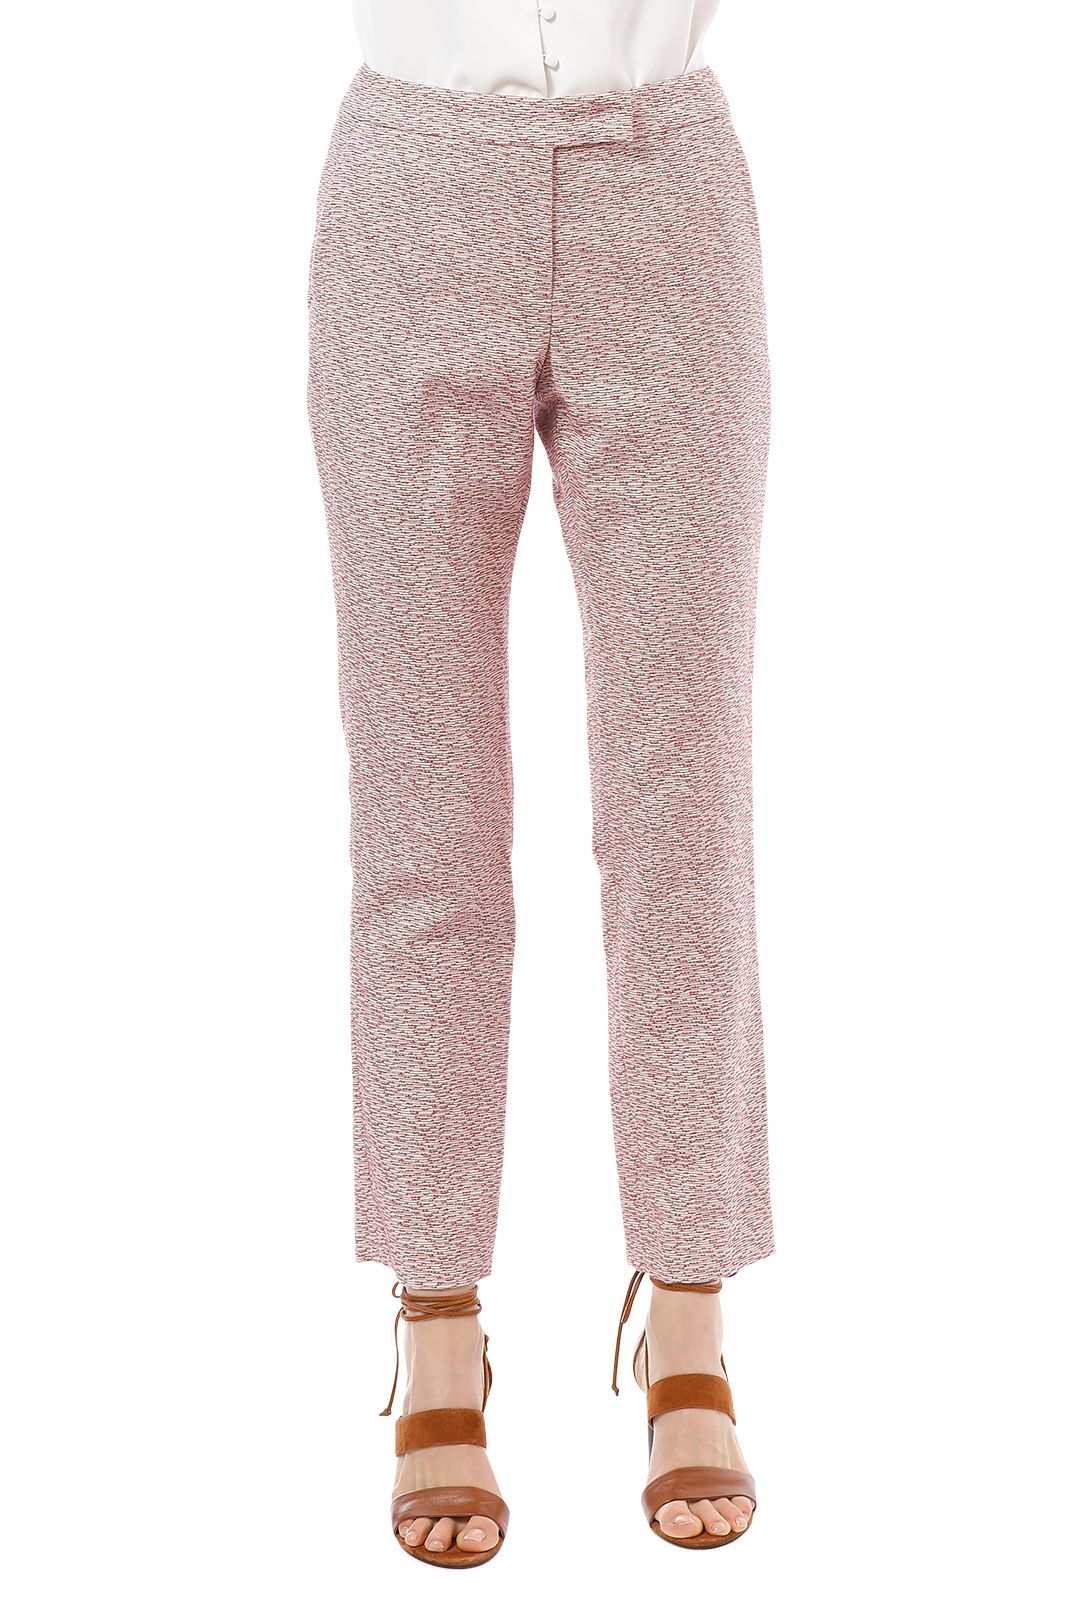 Max and Co - Carezza Pants - Pink - Close Up